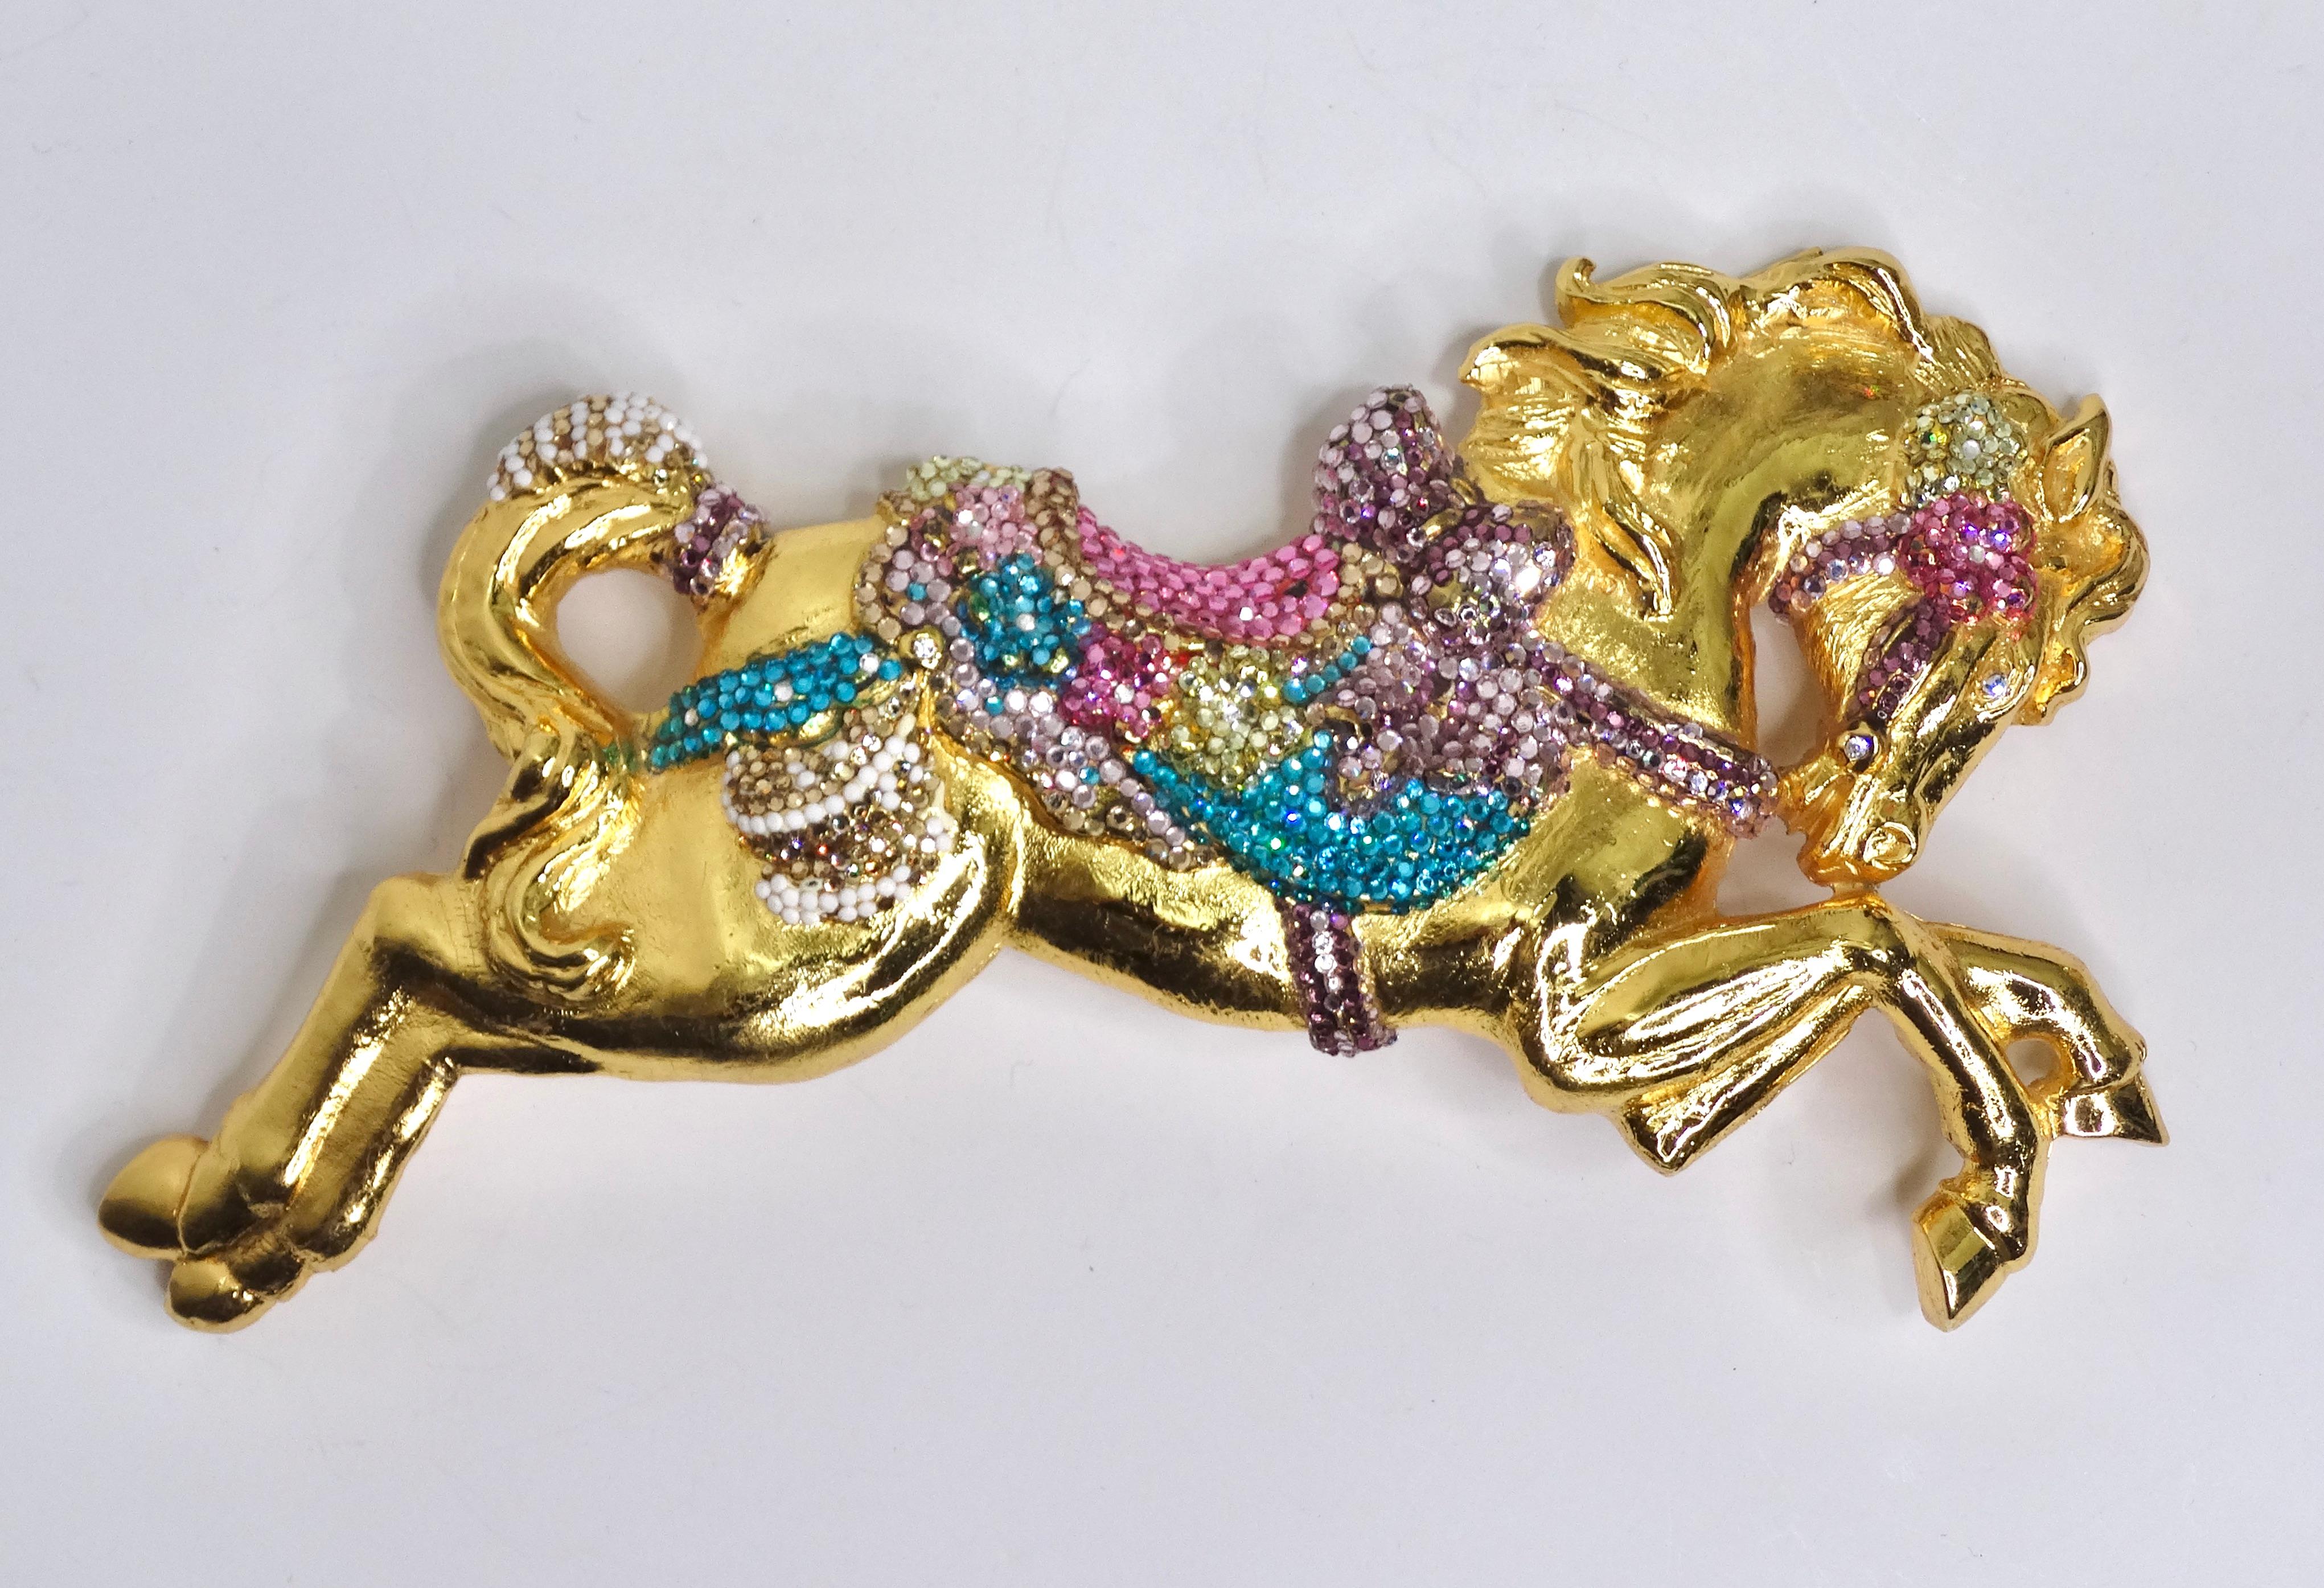 Calling all horse lovers! Add some GLAM to your belt buckle collection & catch someone's attention from across the room with the sparkle. This intricate horse belt buckle is designed and signed by Kathrine Baumann in the 1990's and completely